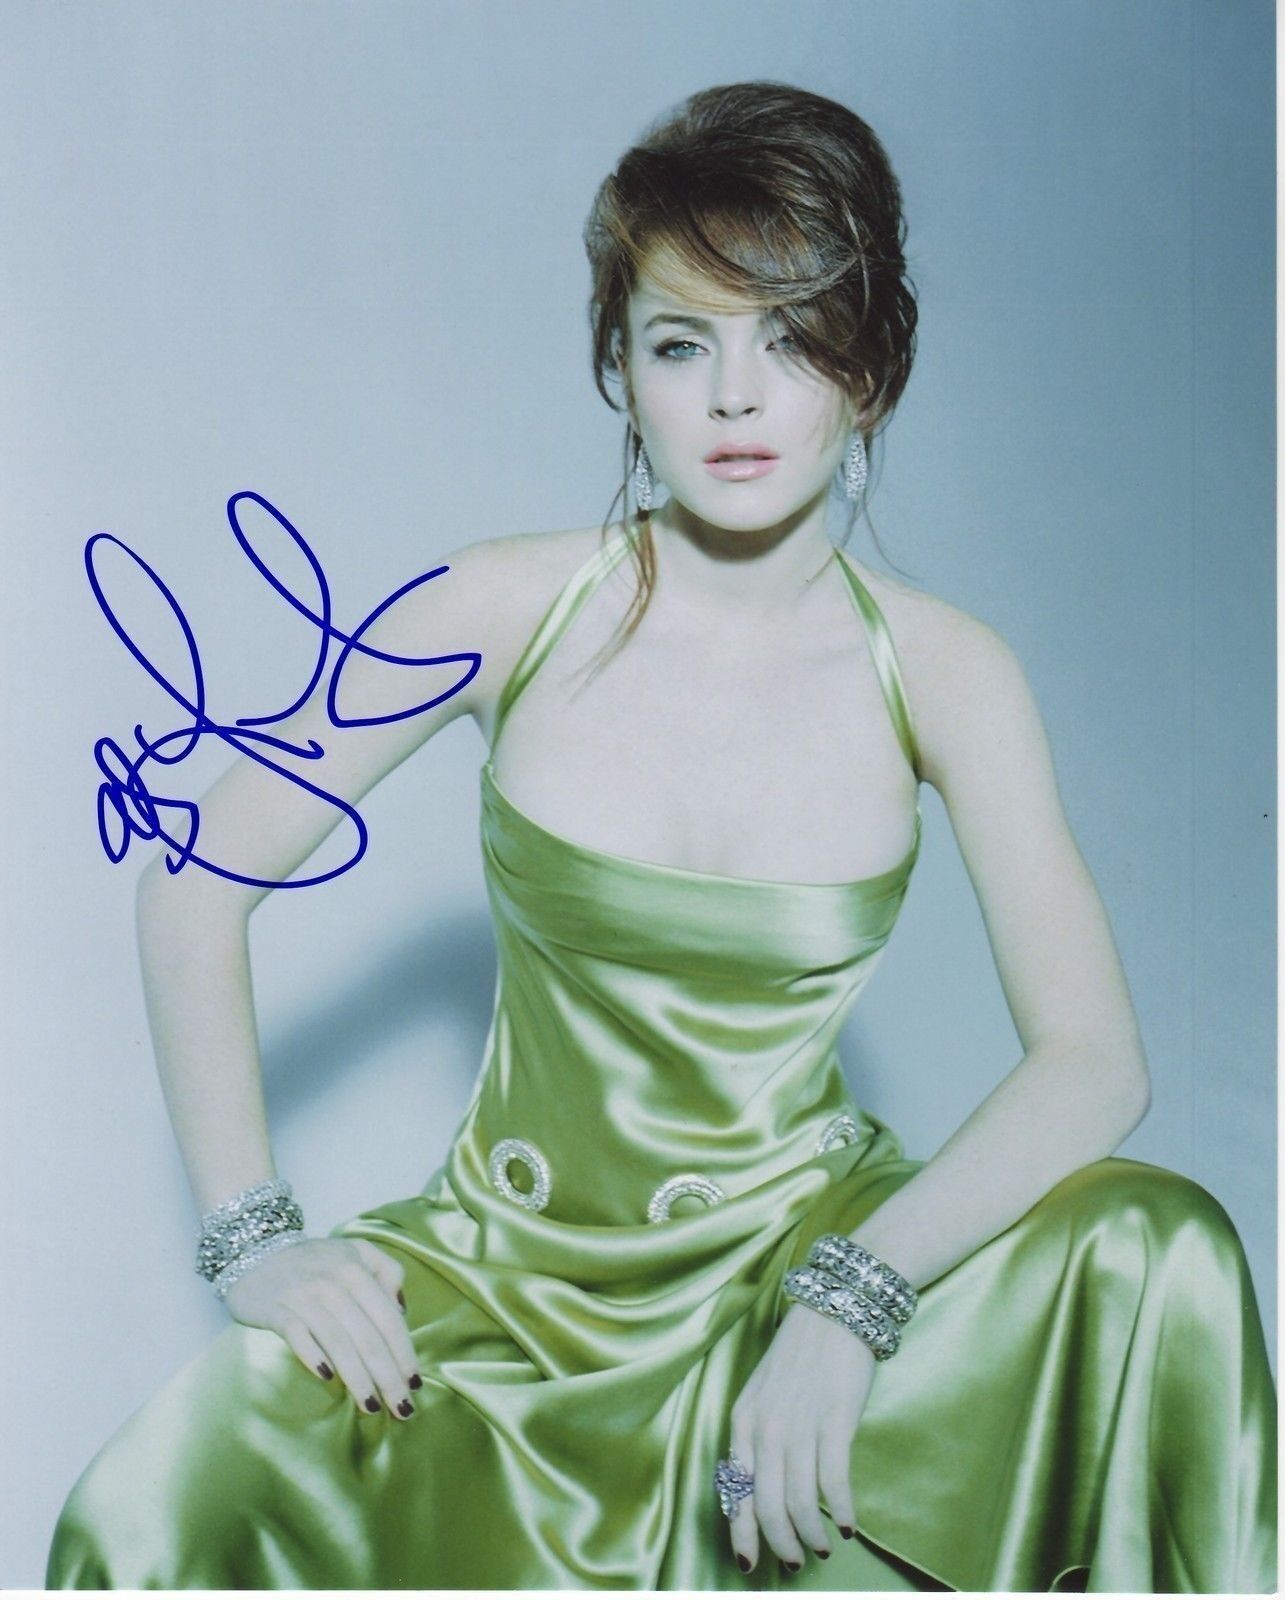 LINDSAY LOHAN AUTOGRAPH SIGNED PP Photo Poster painting POSTER